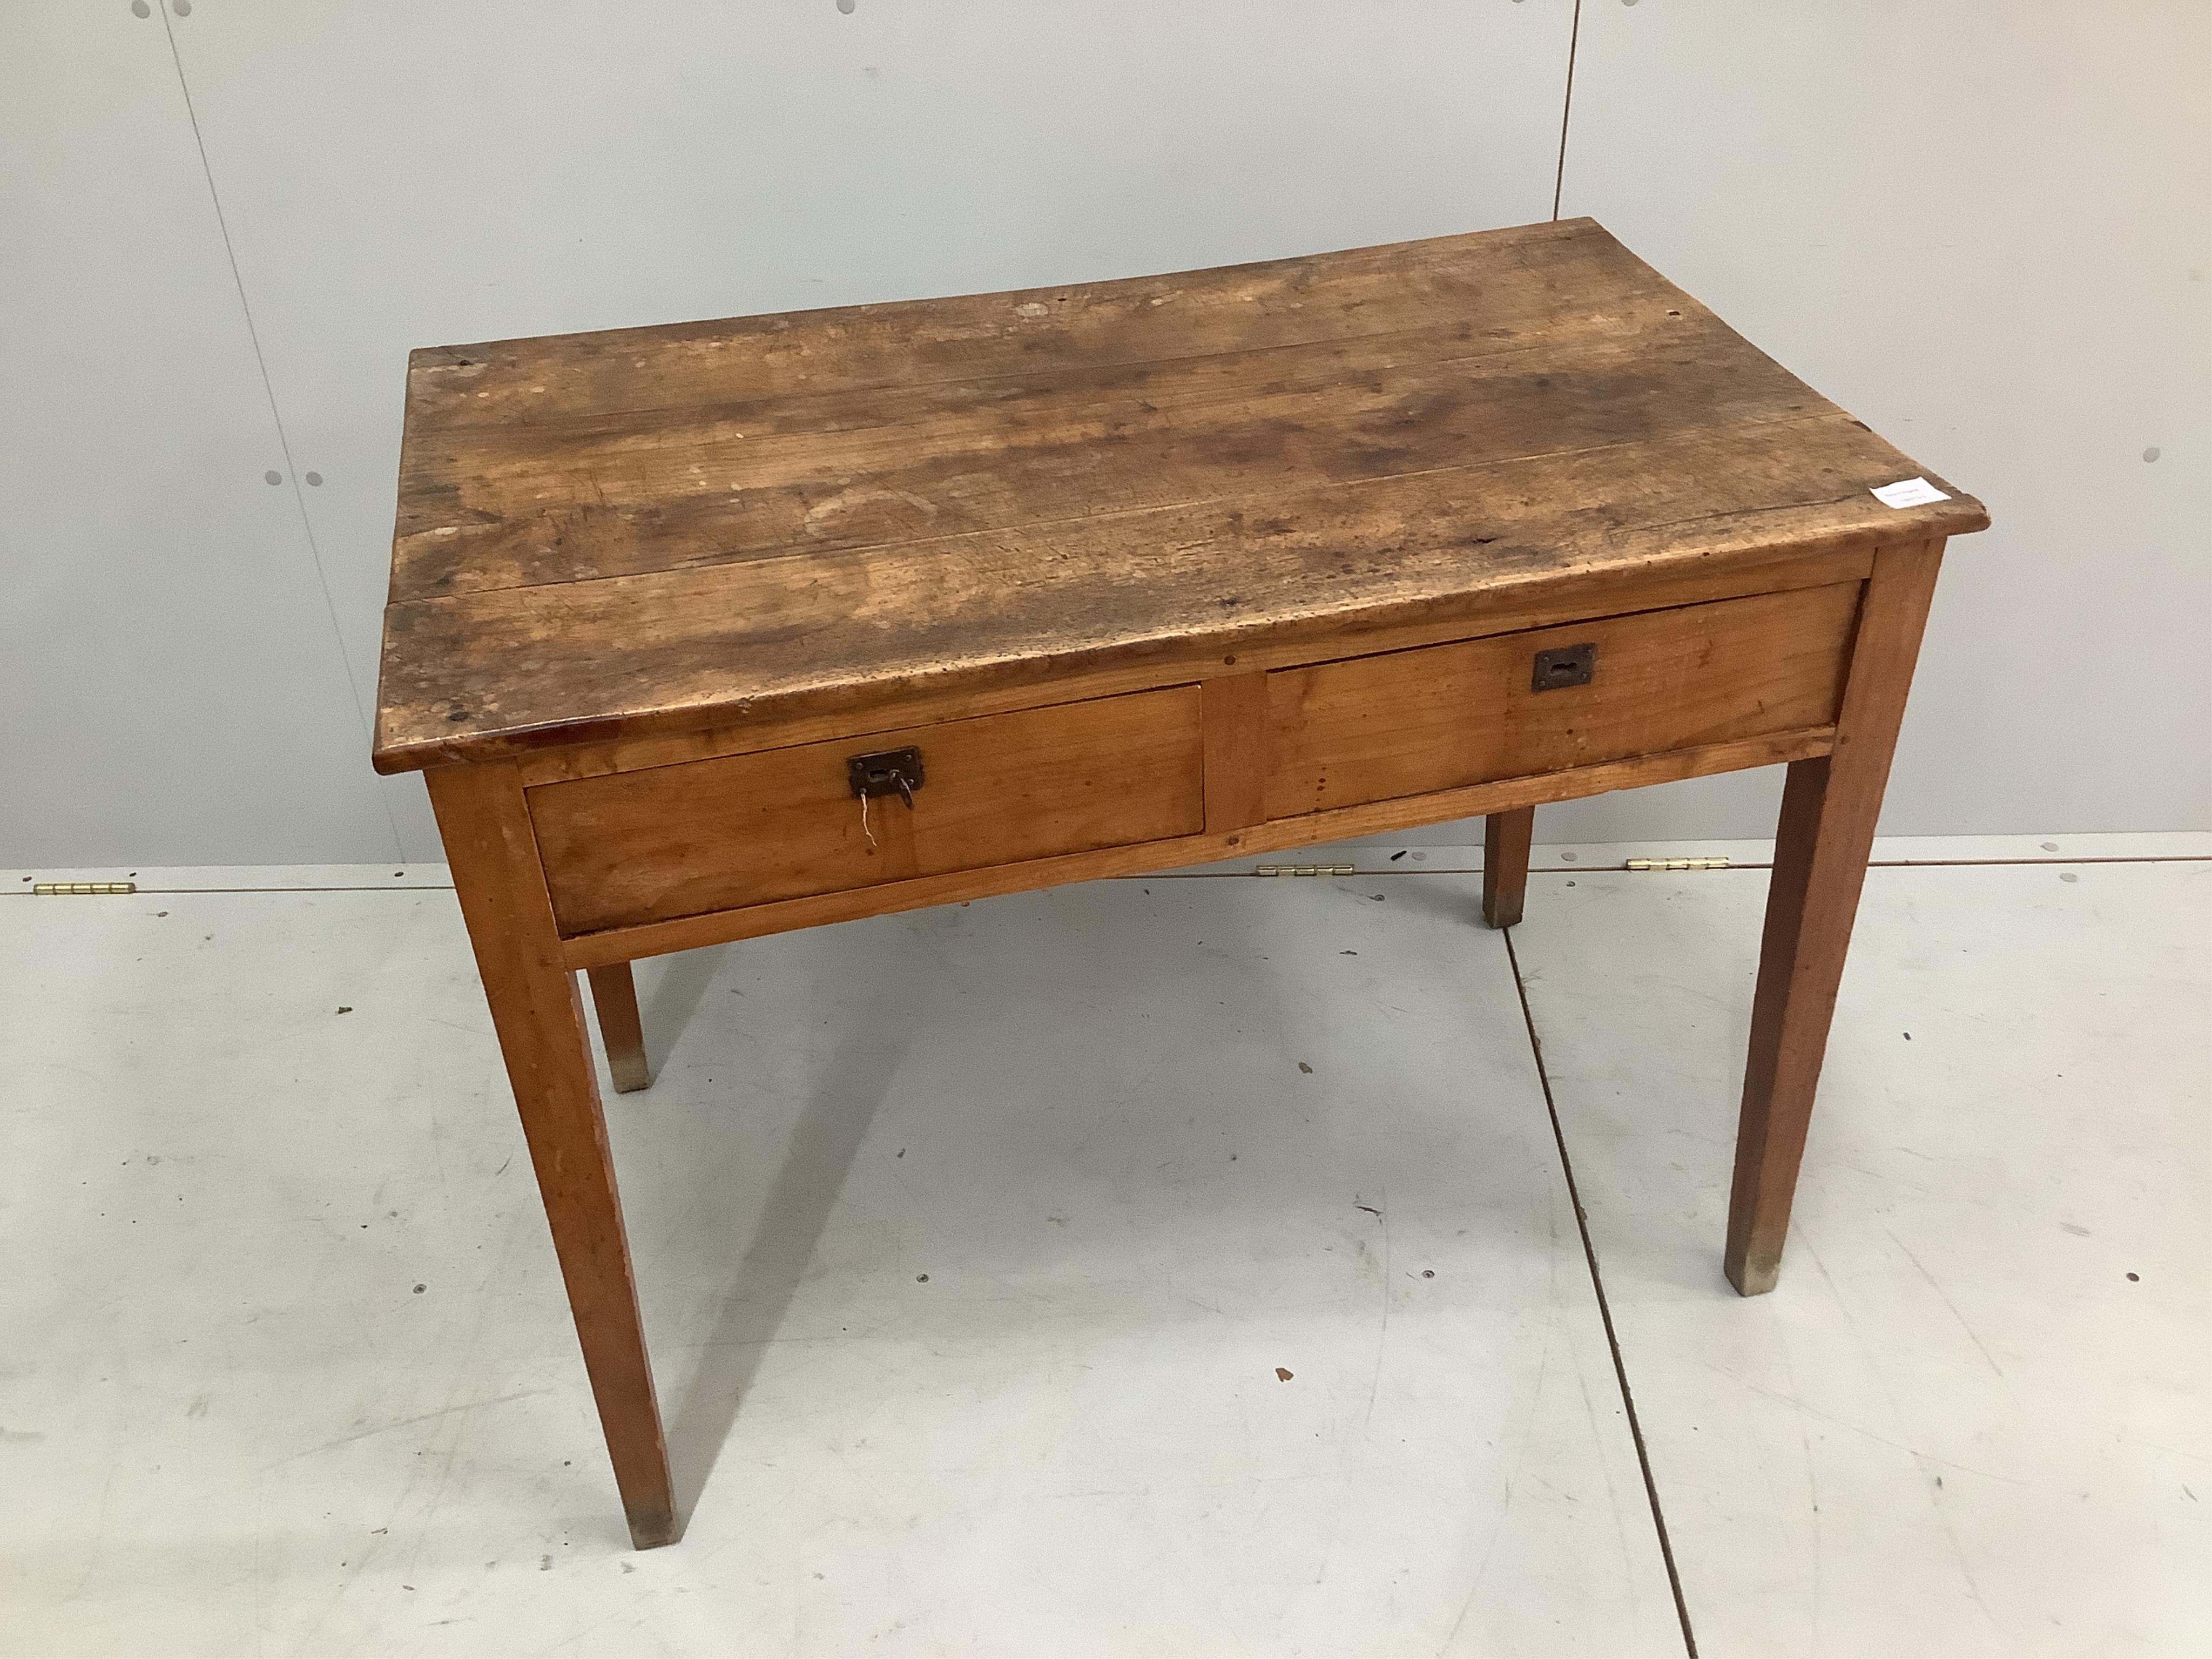 A mid 19th century Continental rectangular fruit wood side table with two drawers, width 97cm, depth 59cm, height 73cm. Condition - fair